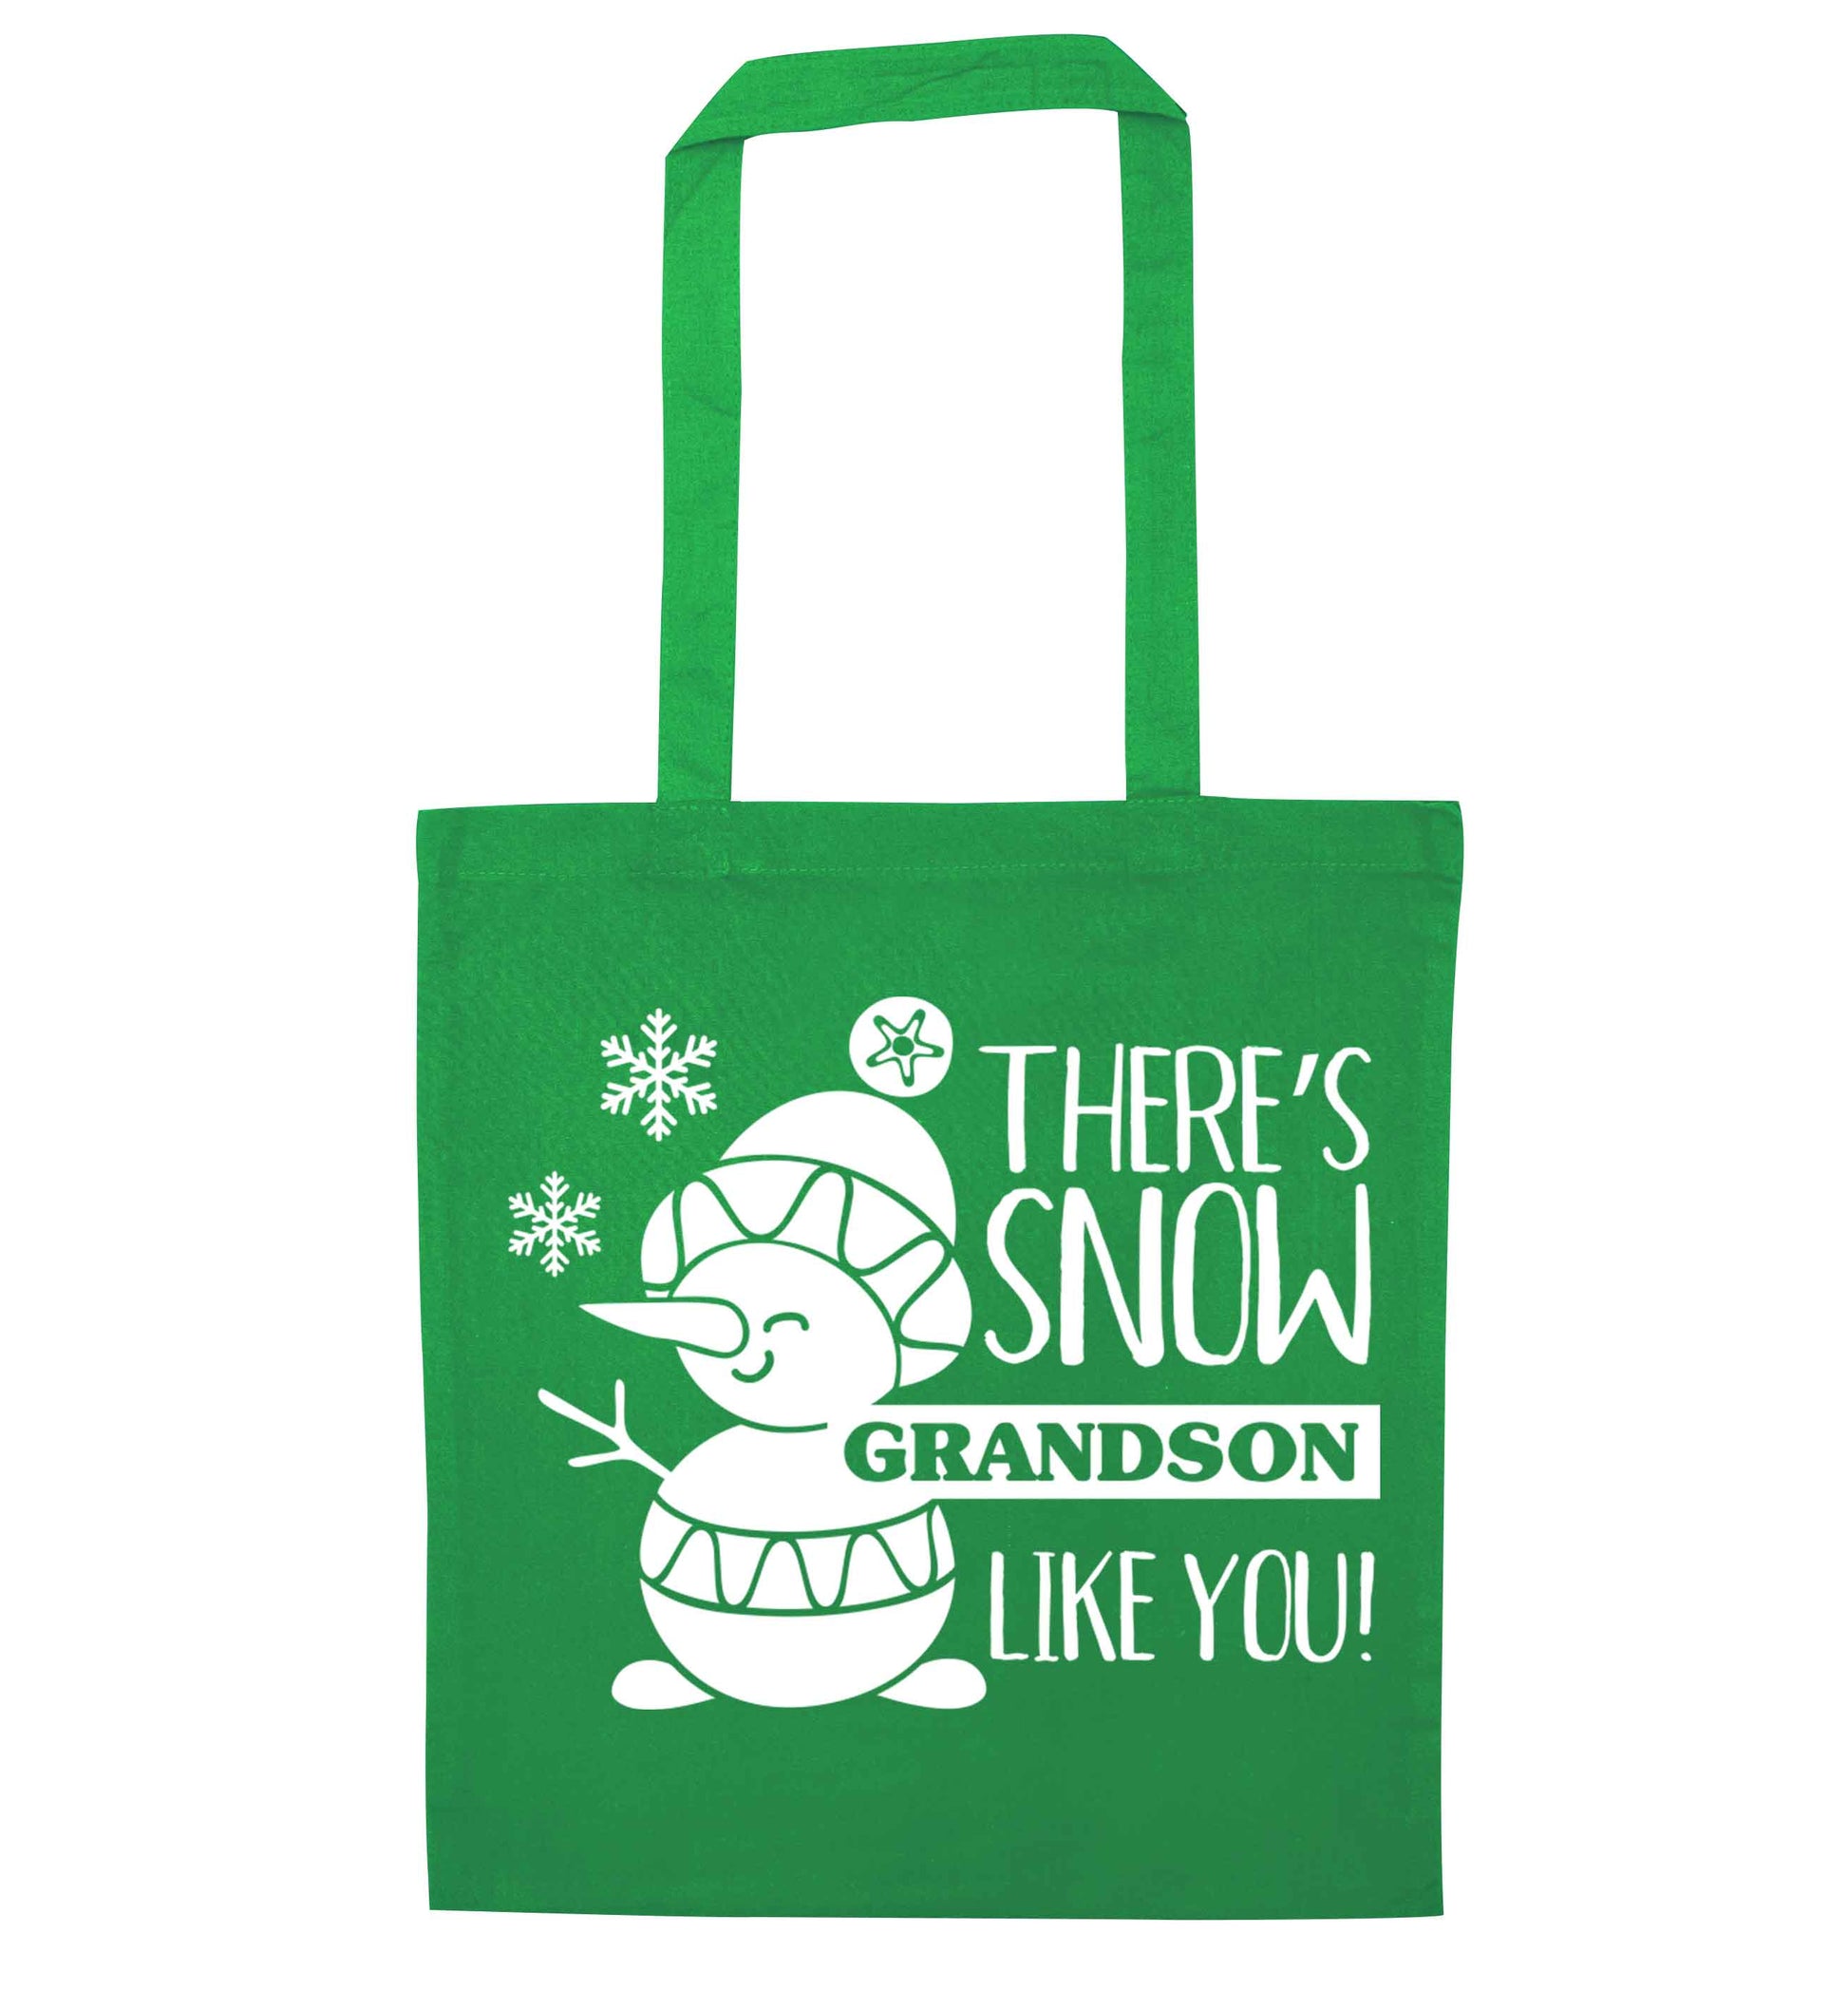 There's snow grandson like you green tote bag